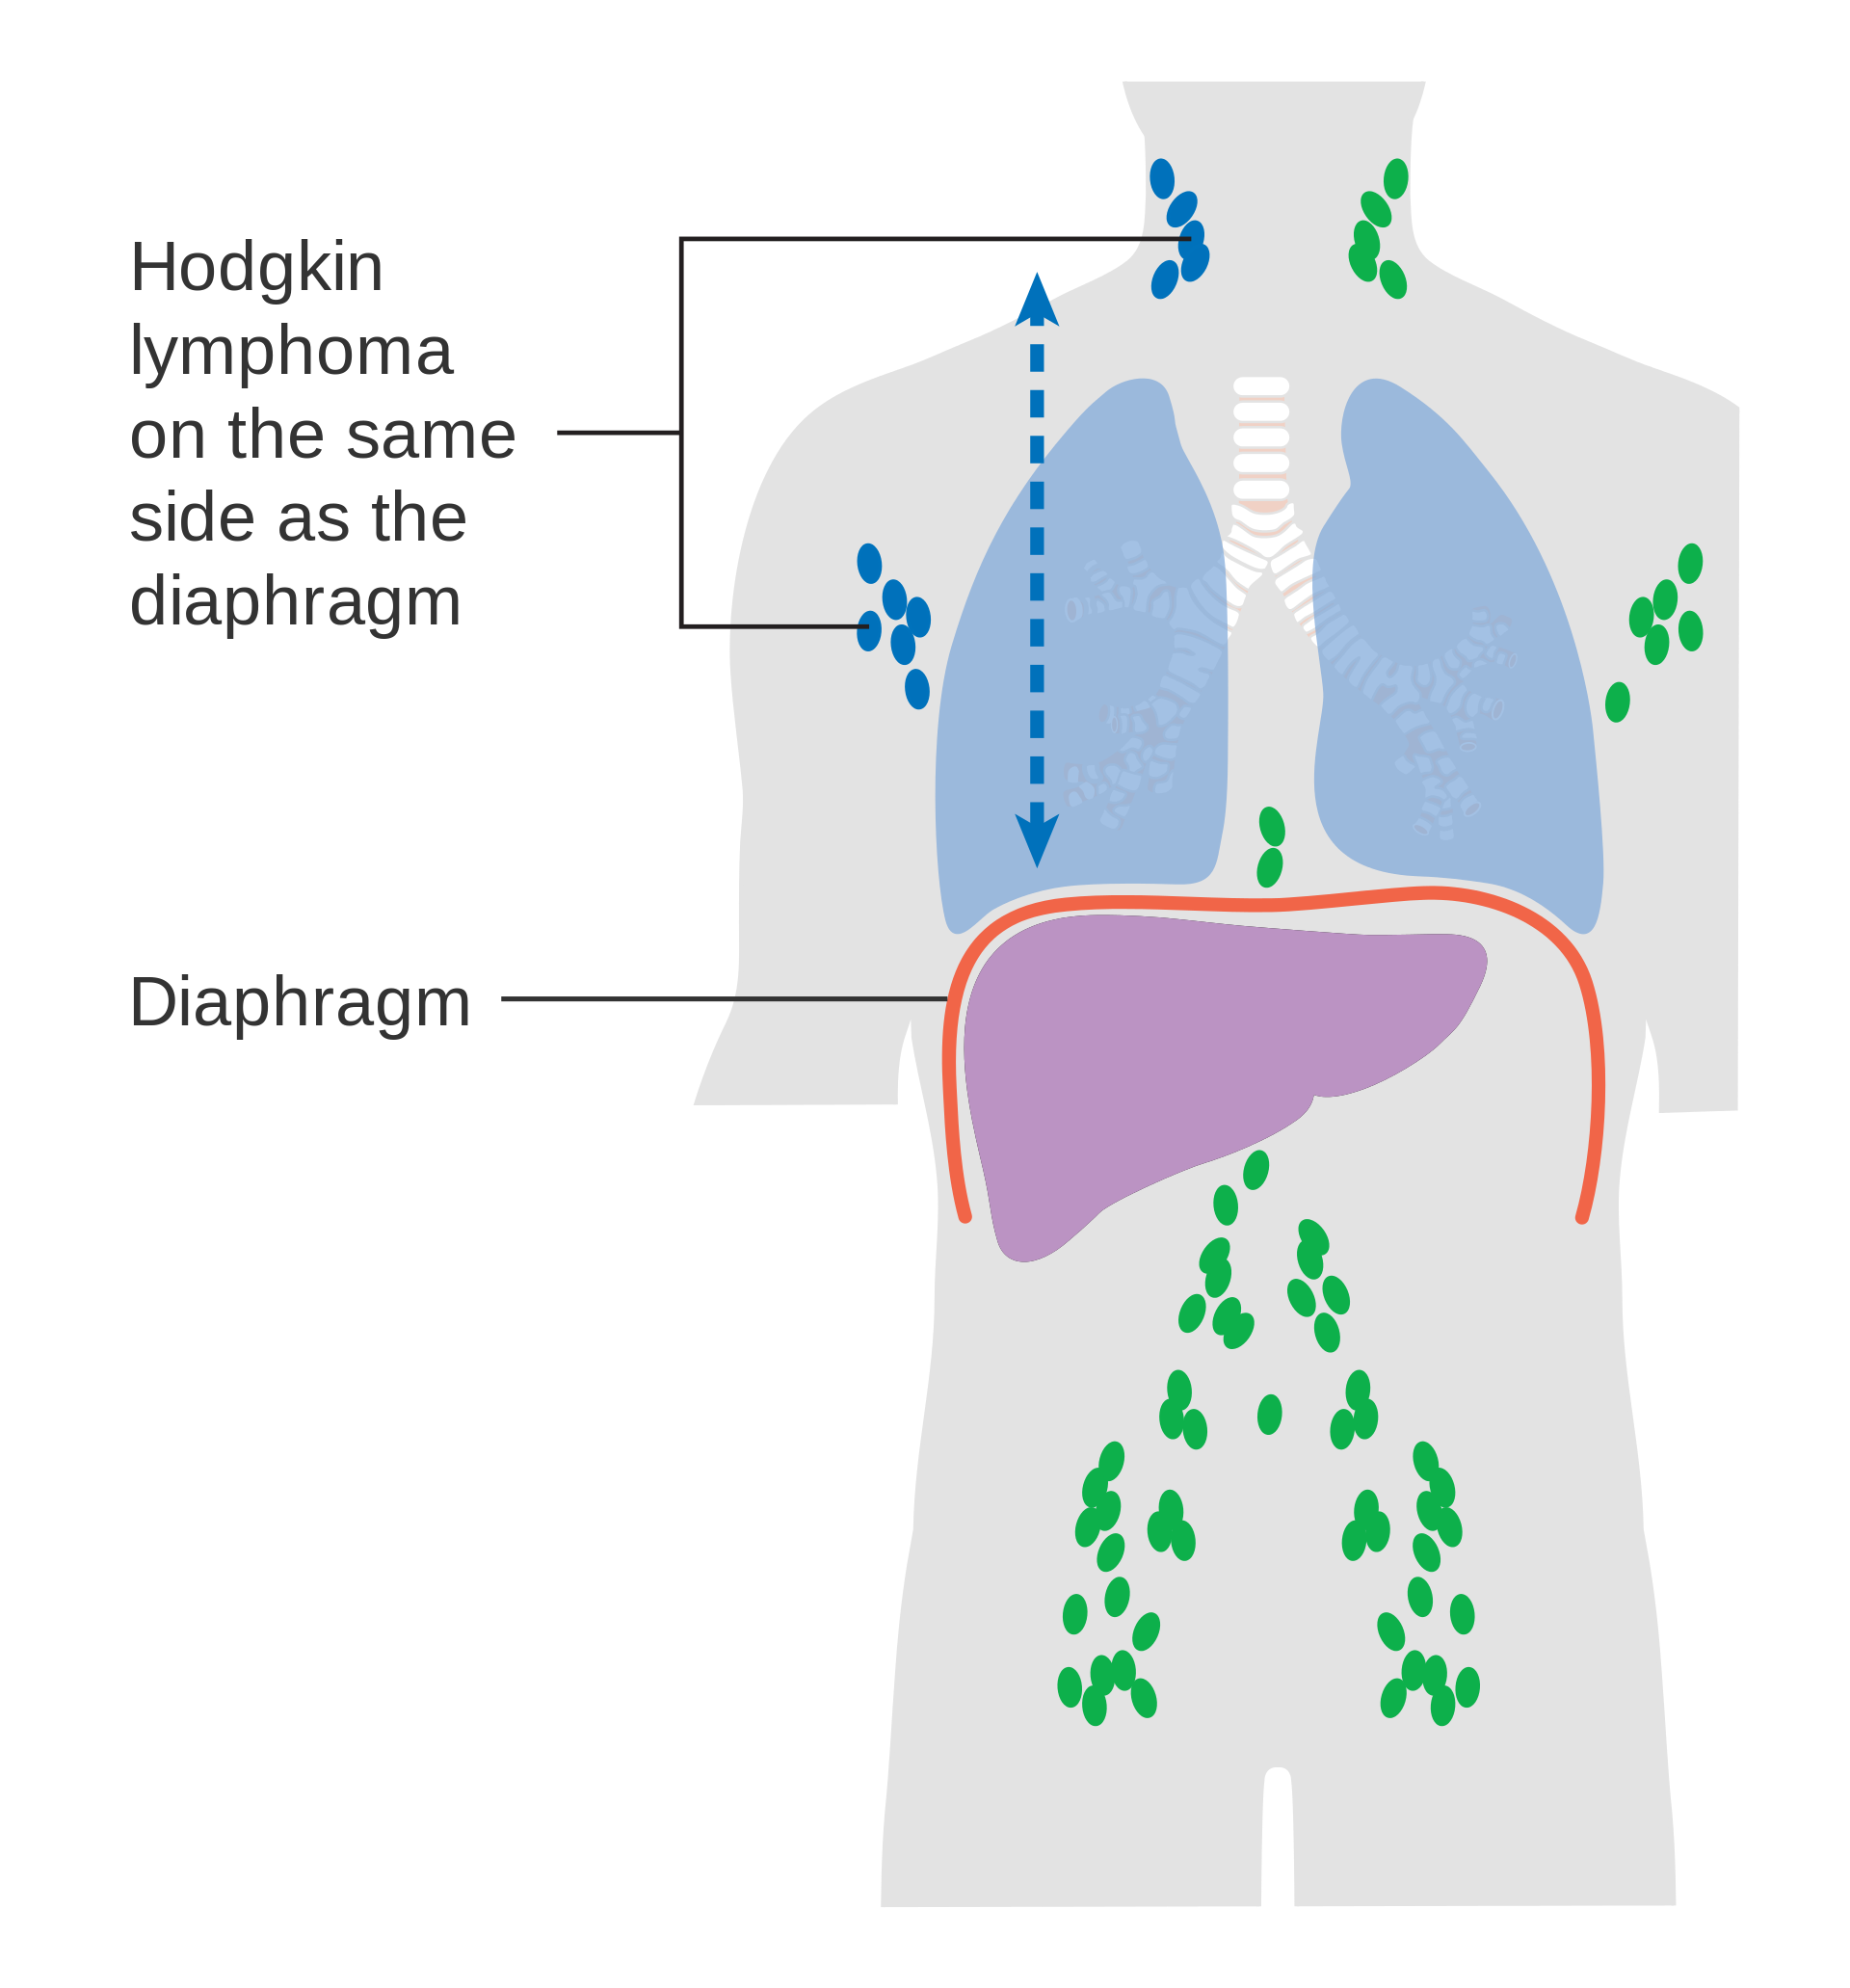 Stage II Hodgkin lymphoma: lymph nodes affected in neck and axilla on the right side above the diaphragm